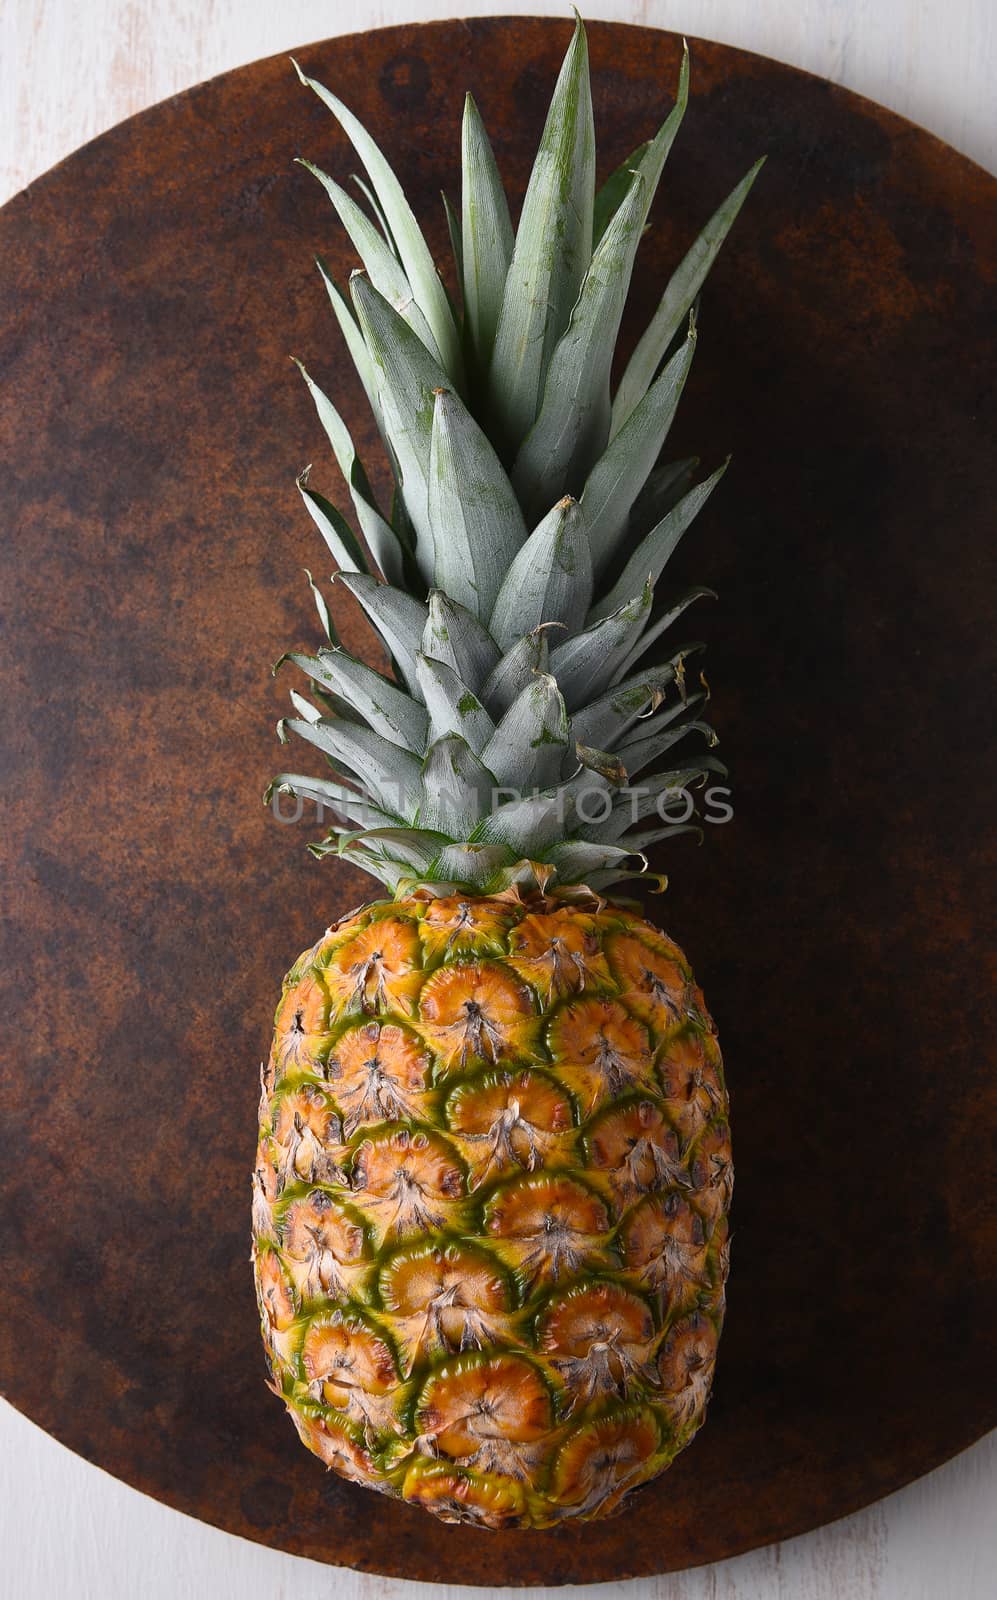 Top view of a fresh ripe pineapple on a round stone surface.